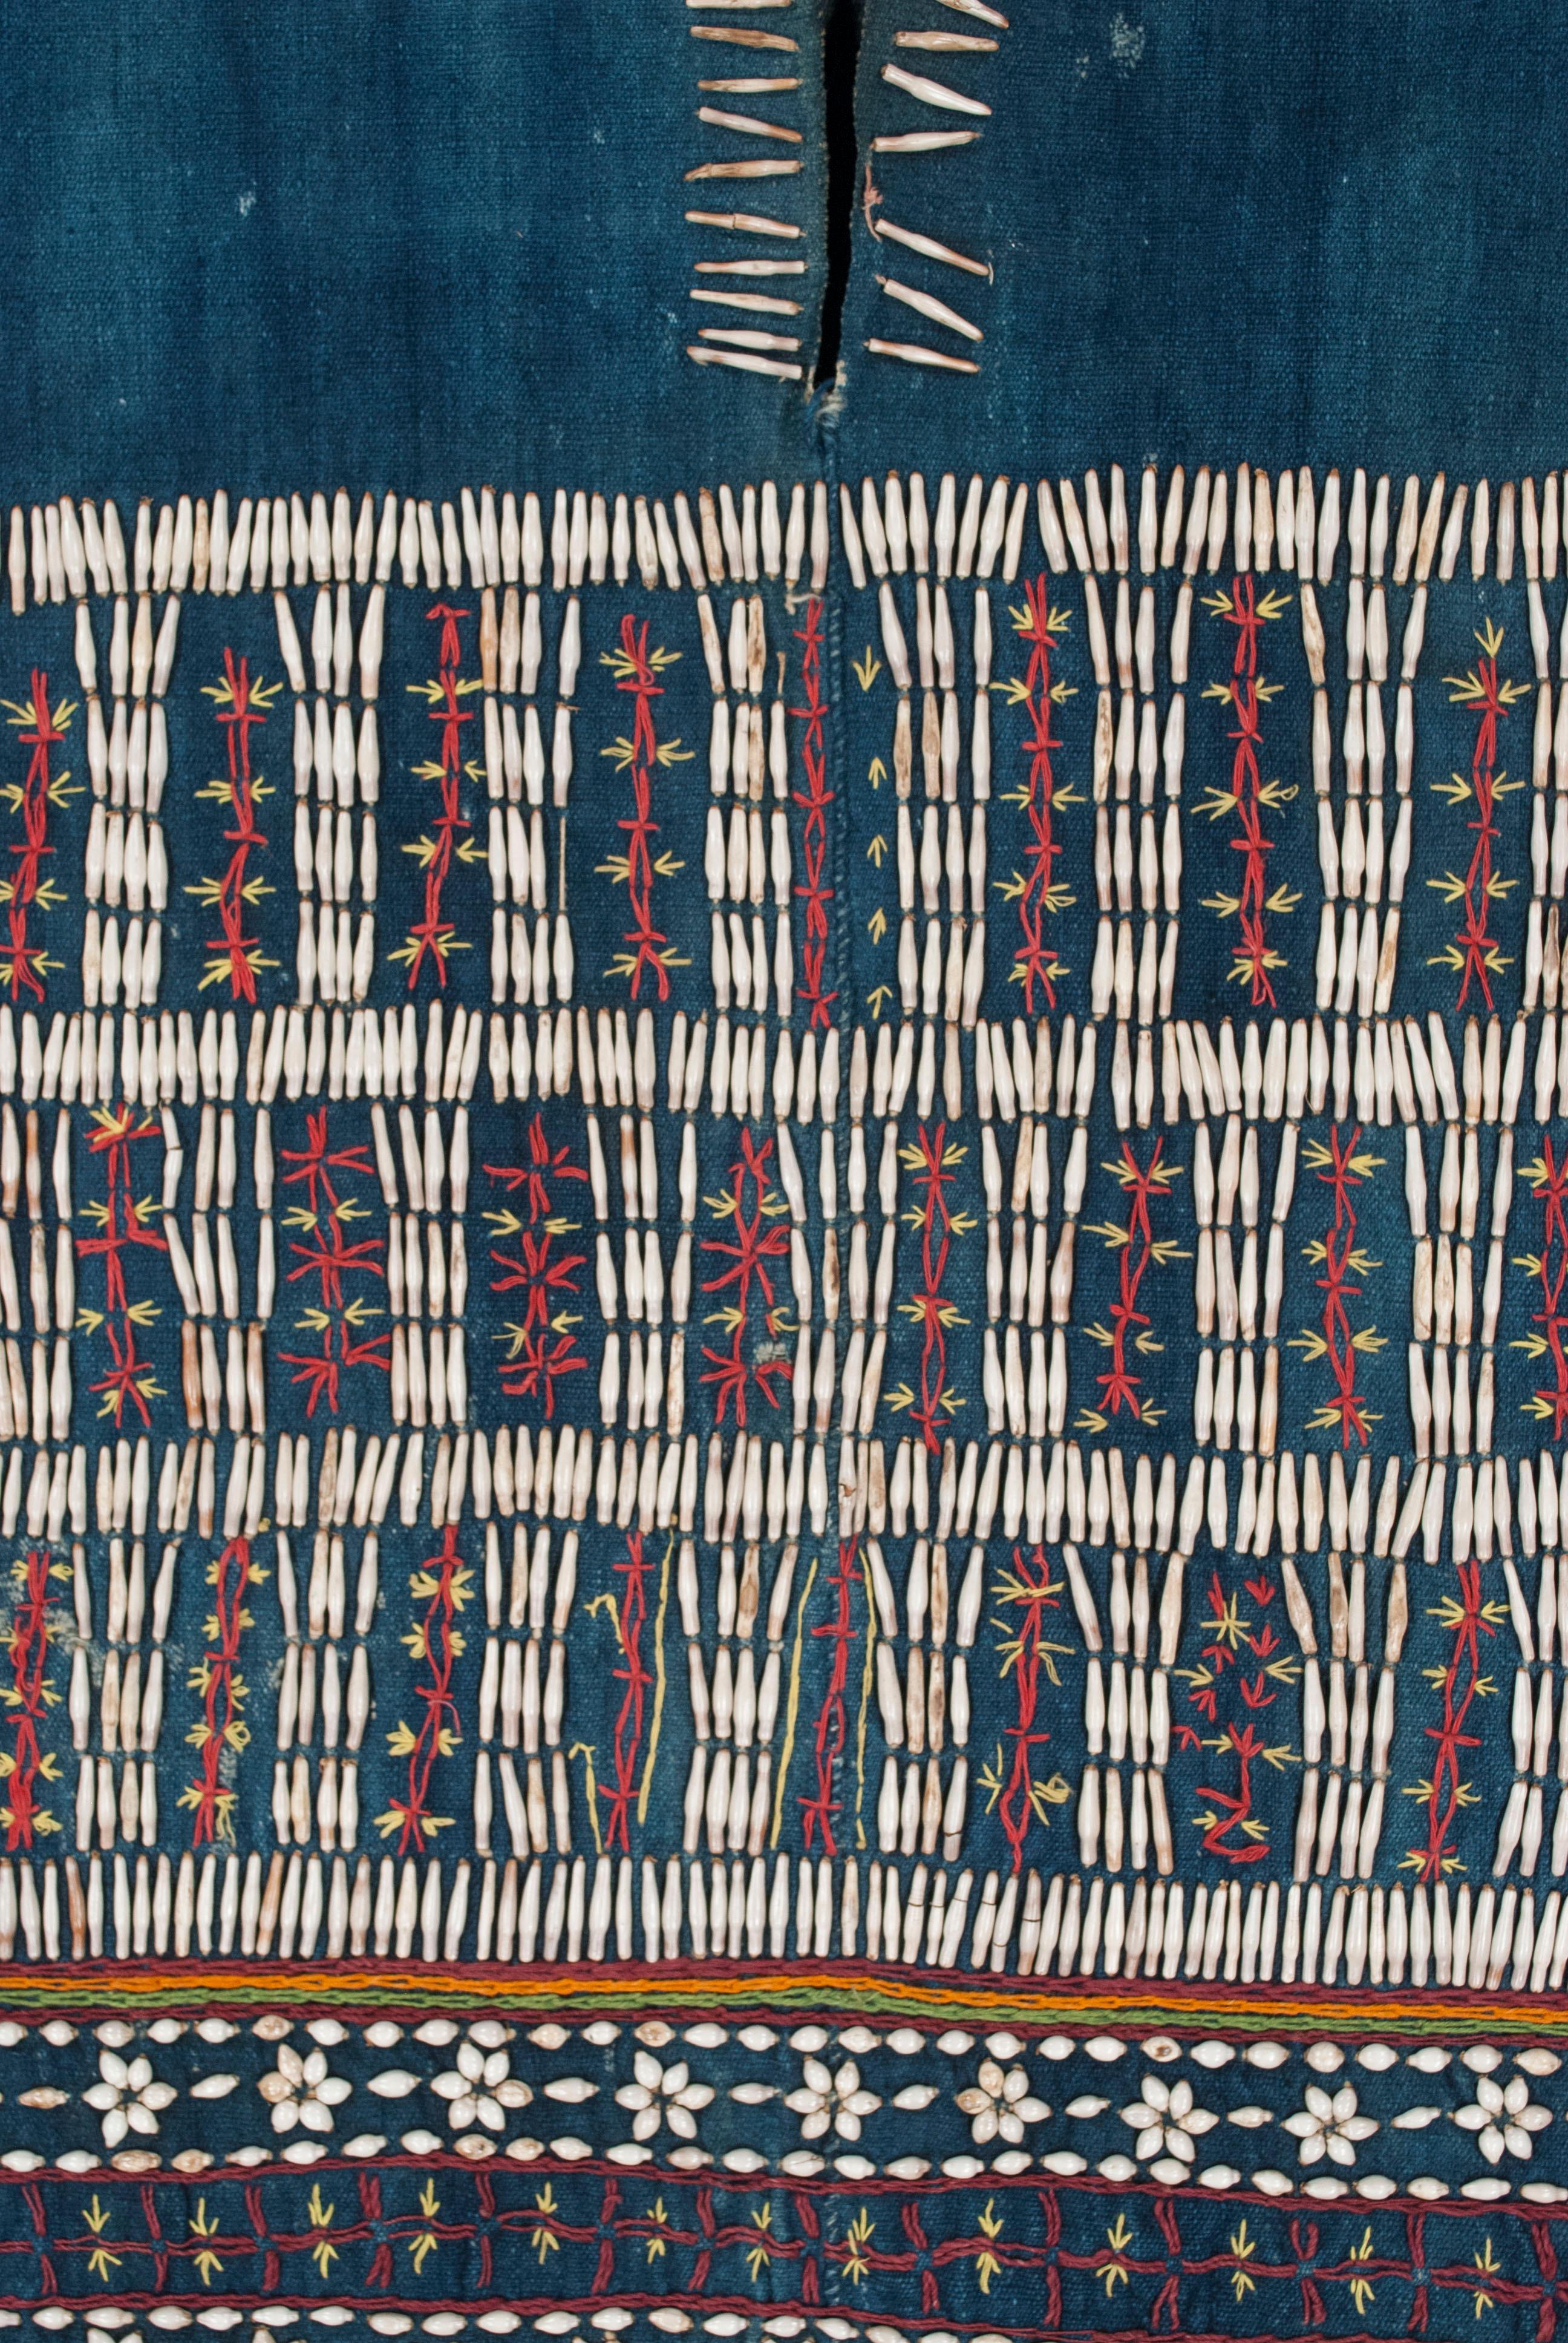 Early-mid 20th century Karen (Sgaw) women’s ceremonial tunic, Burma / Myanmar

Typically used in weddings and other formal occasions, woman’s tunics from the Sgaw Karen ethnic group in Burma were primarily decorated with applied Job’s tears on a